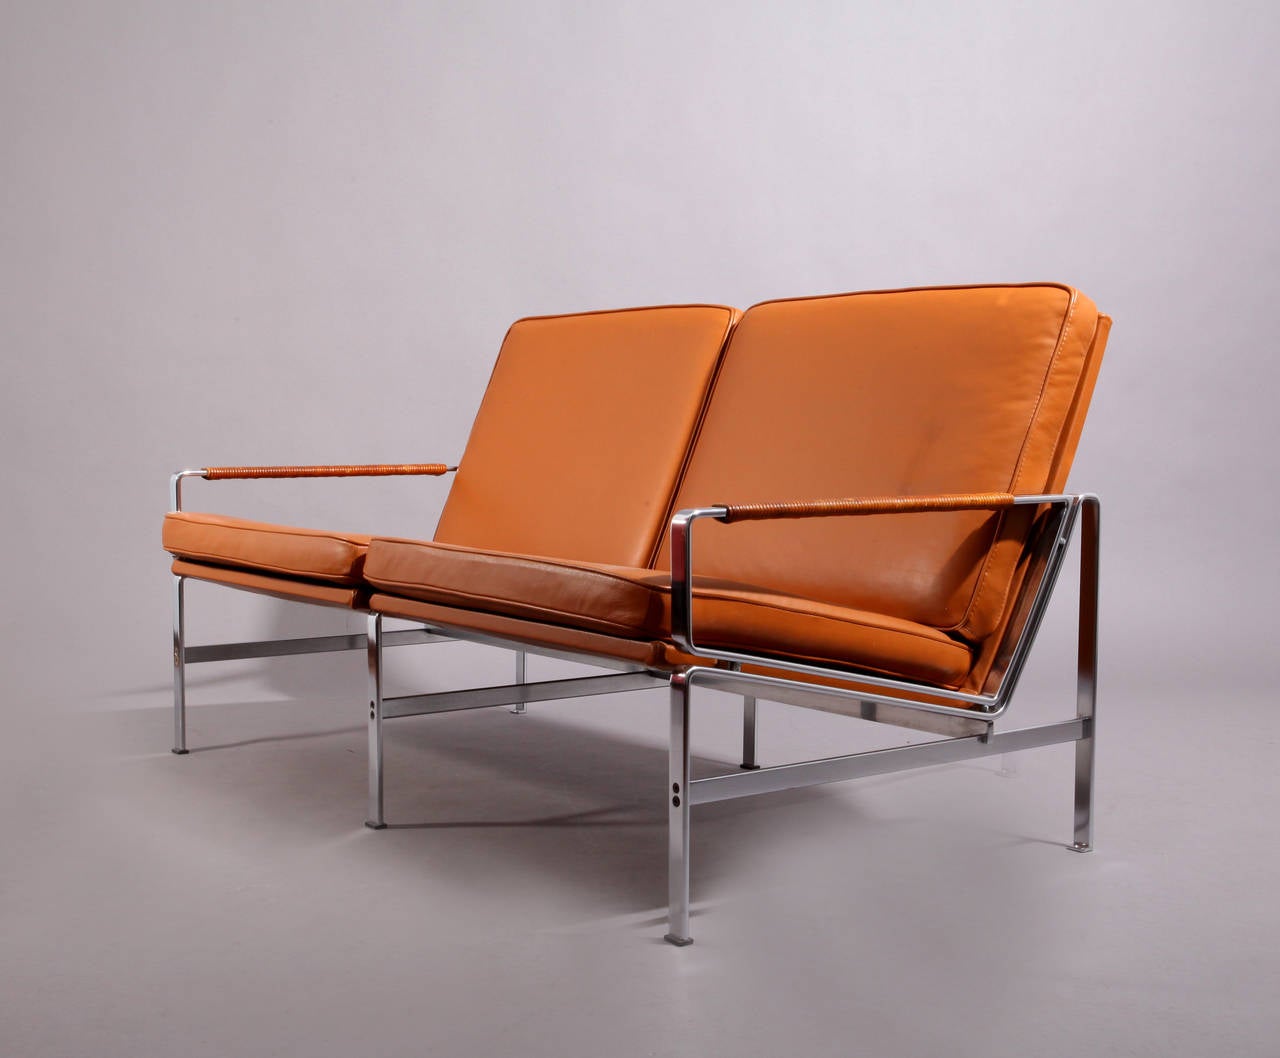 Two-seat sofa FK 6720 by Fabricius & Kastholm, 1967.
Made by Kill International, Germany.
Brown natural leather, chromed steel.
Measures: Wide 57